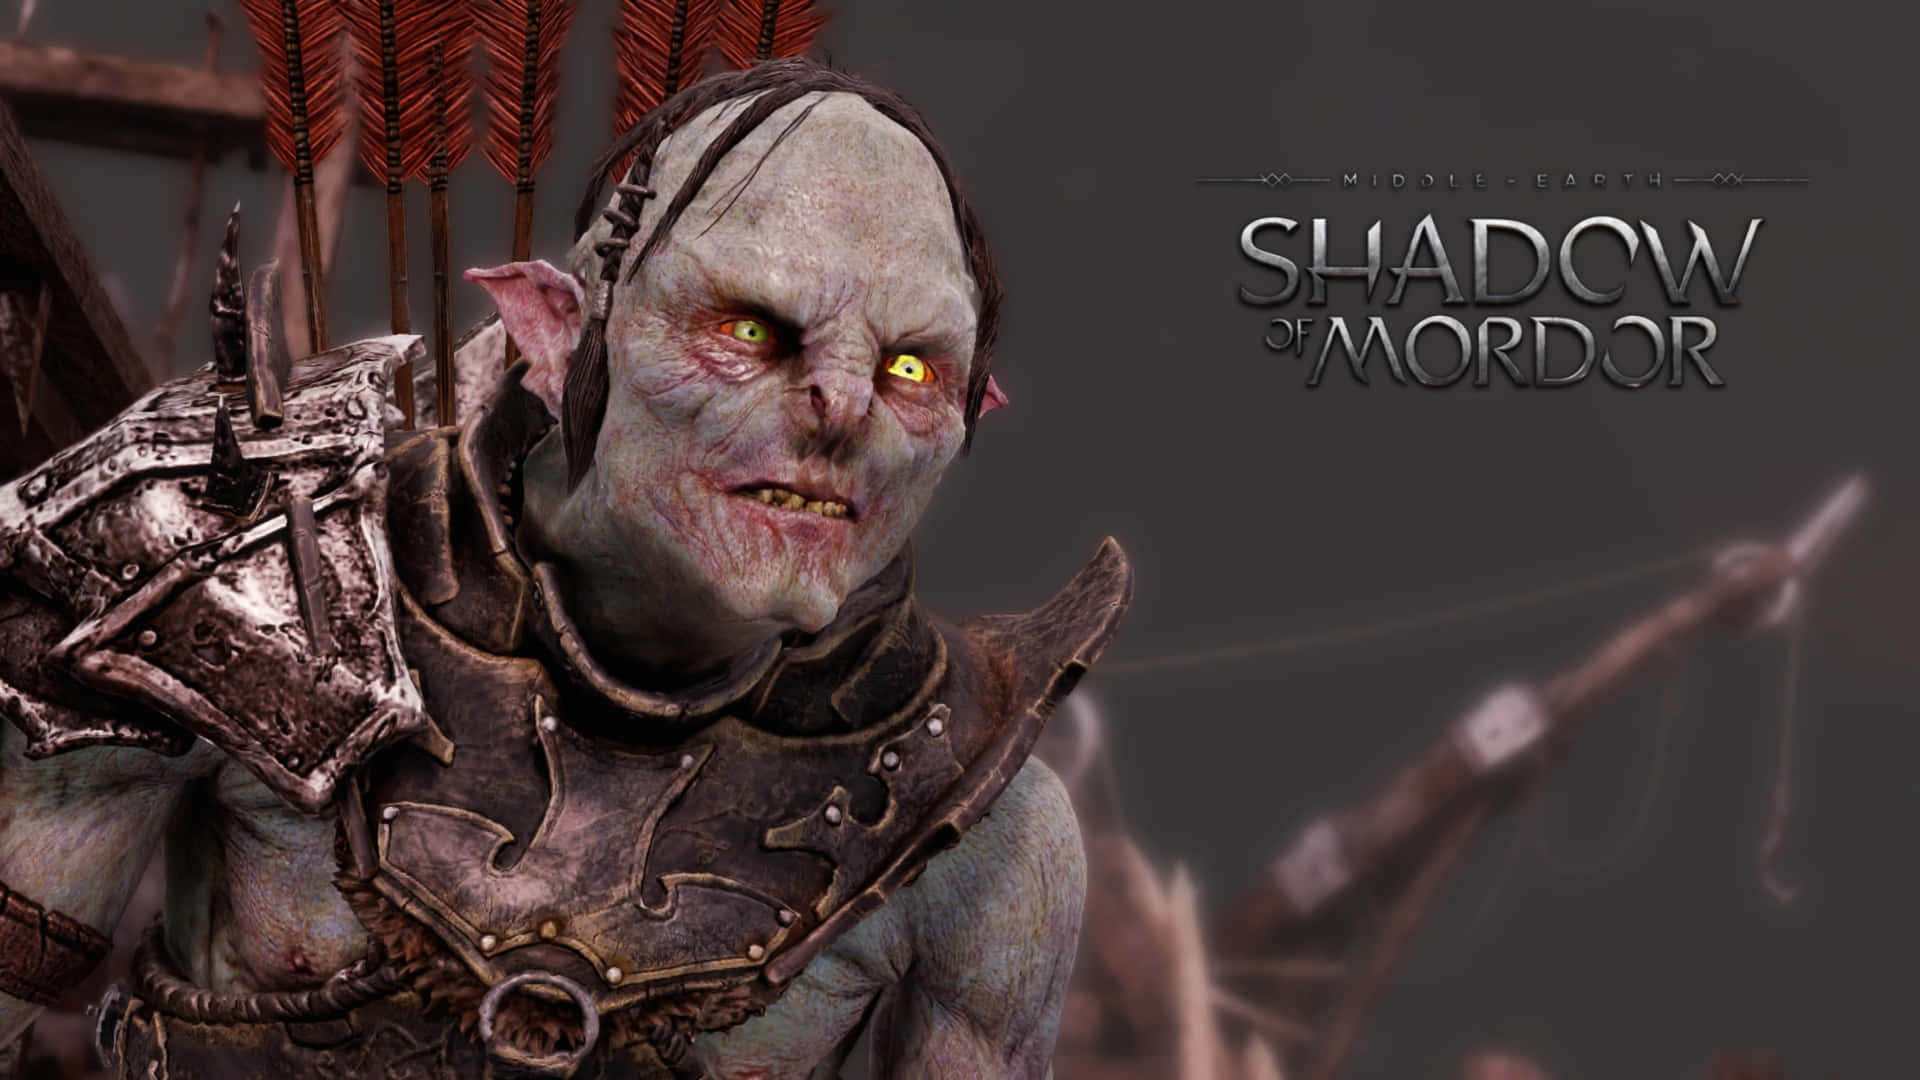 Join the battle against Sauron's Army with Shadow of Mordor